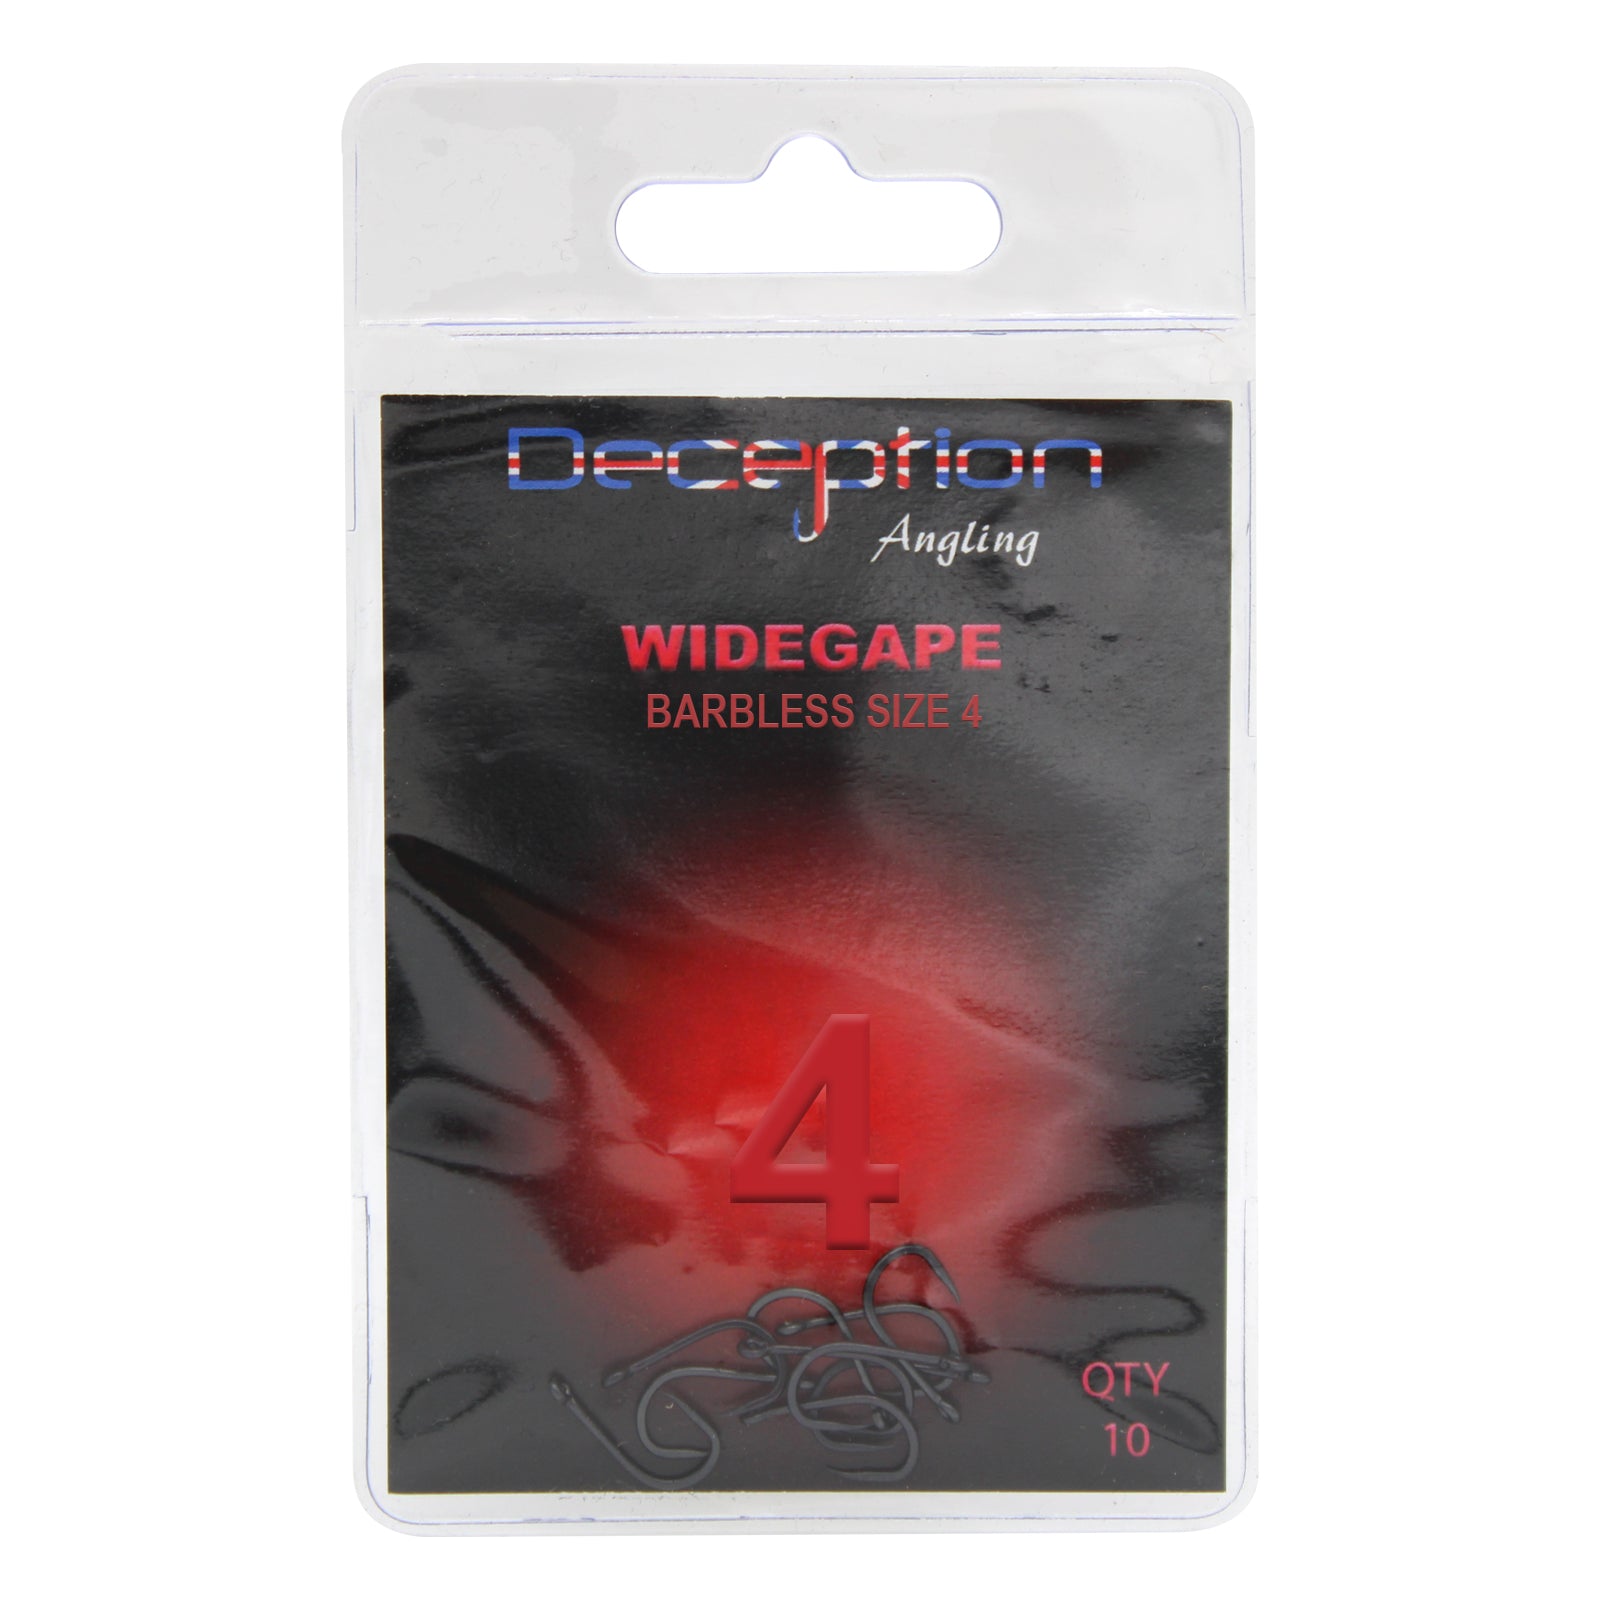 Deception Angling Wide Gape Barbless Fishing Hooks Pack of 10 - Size 4